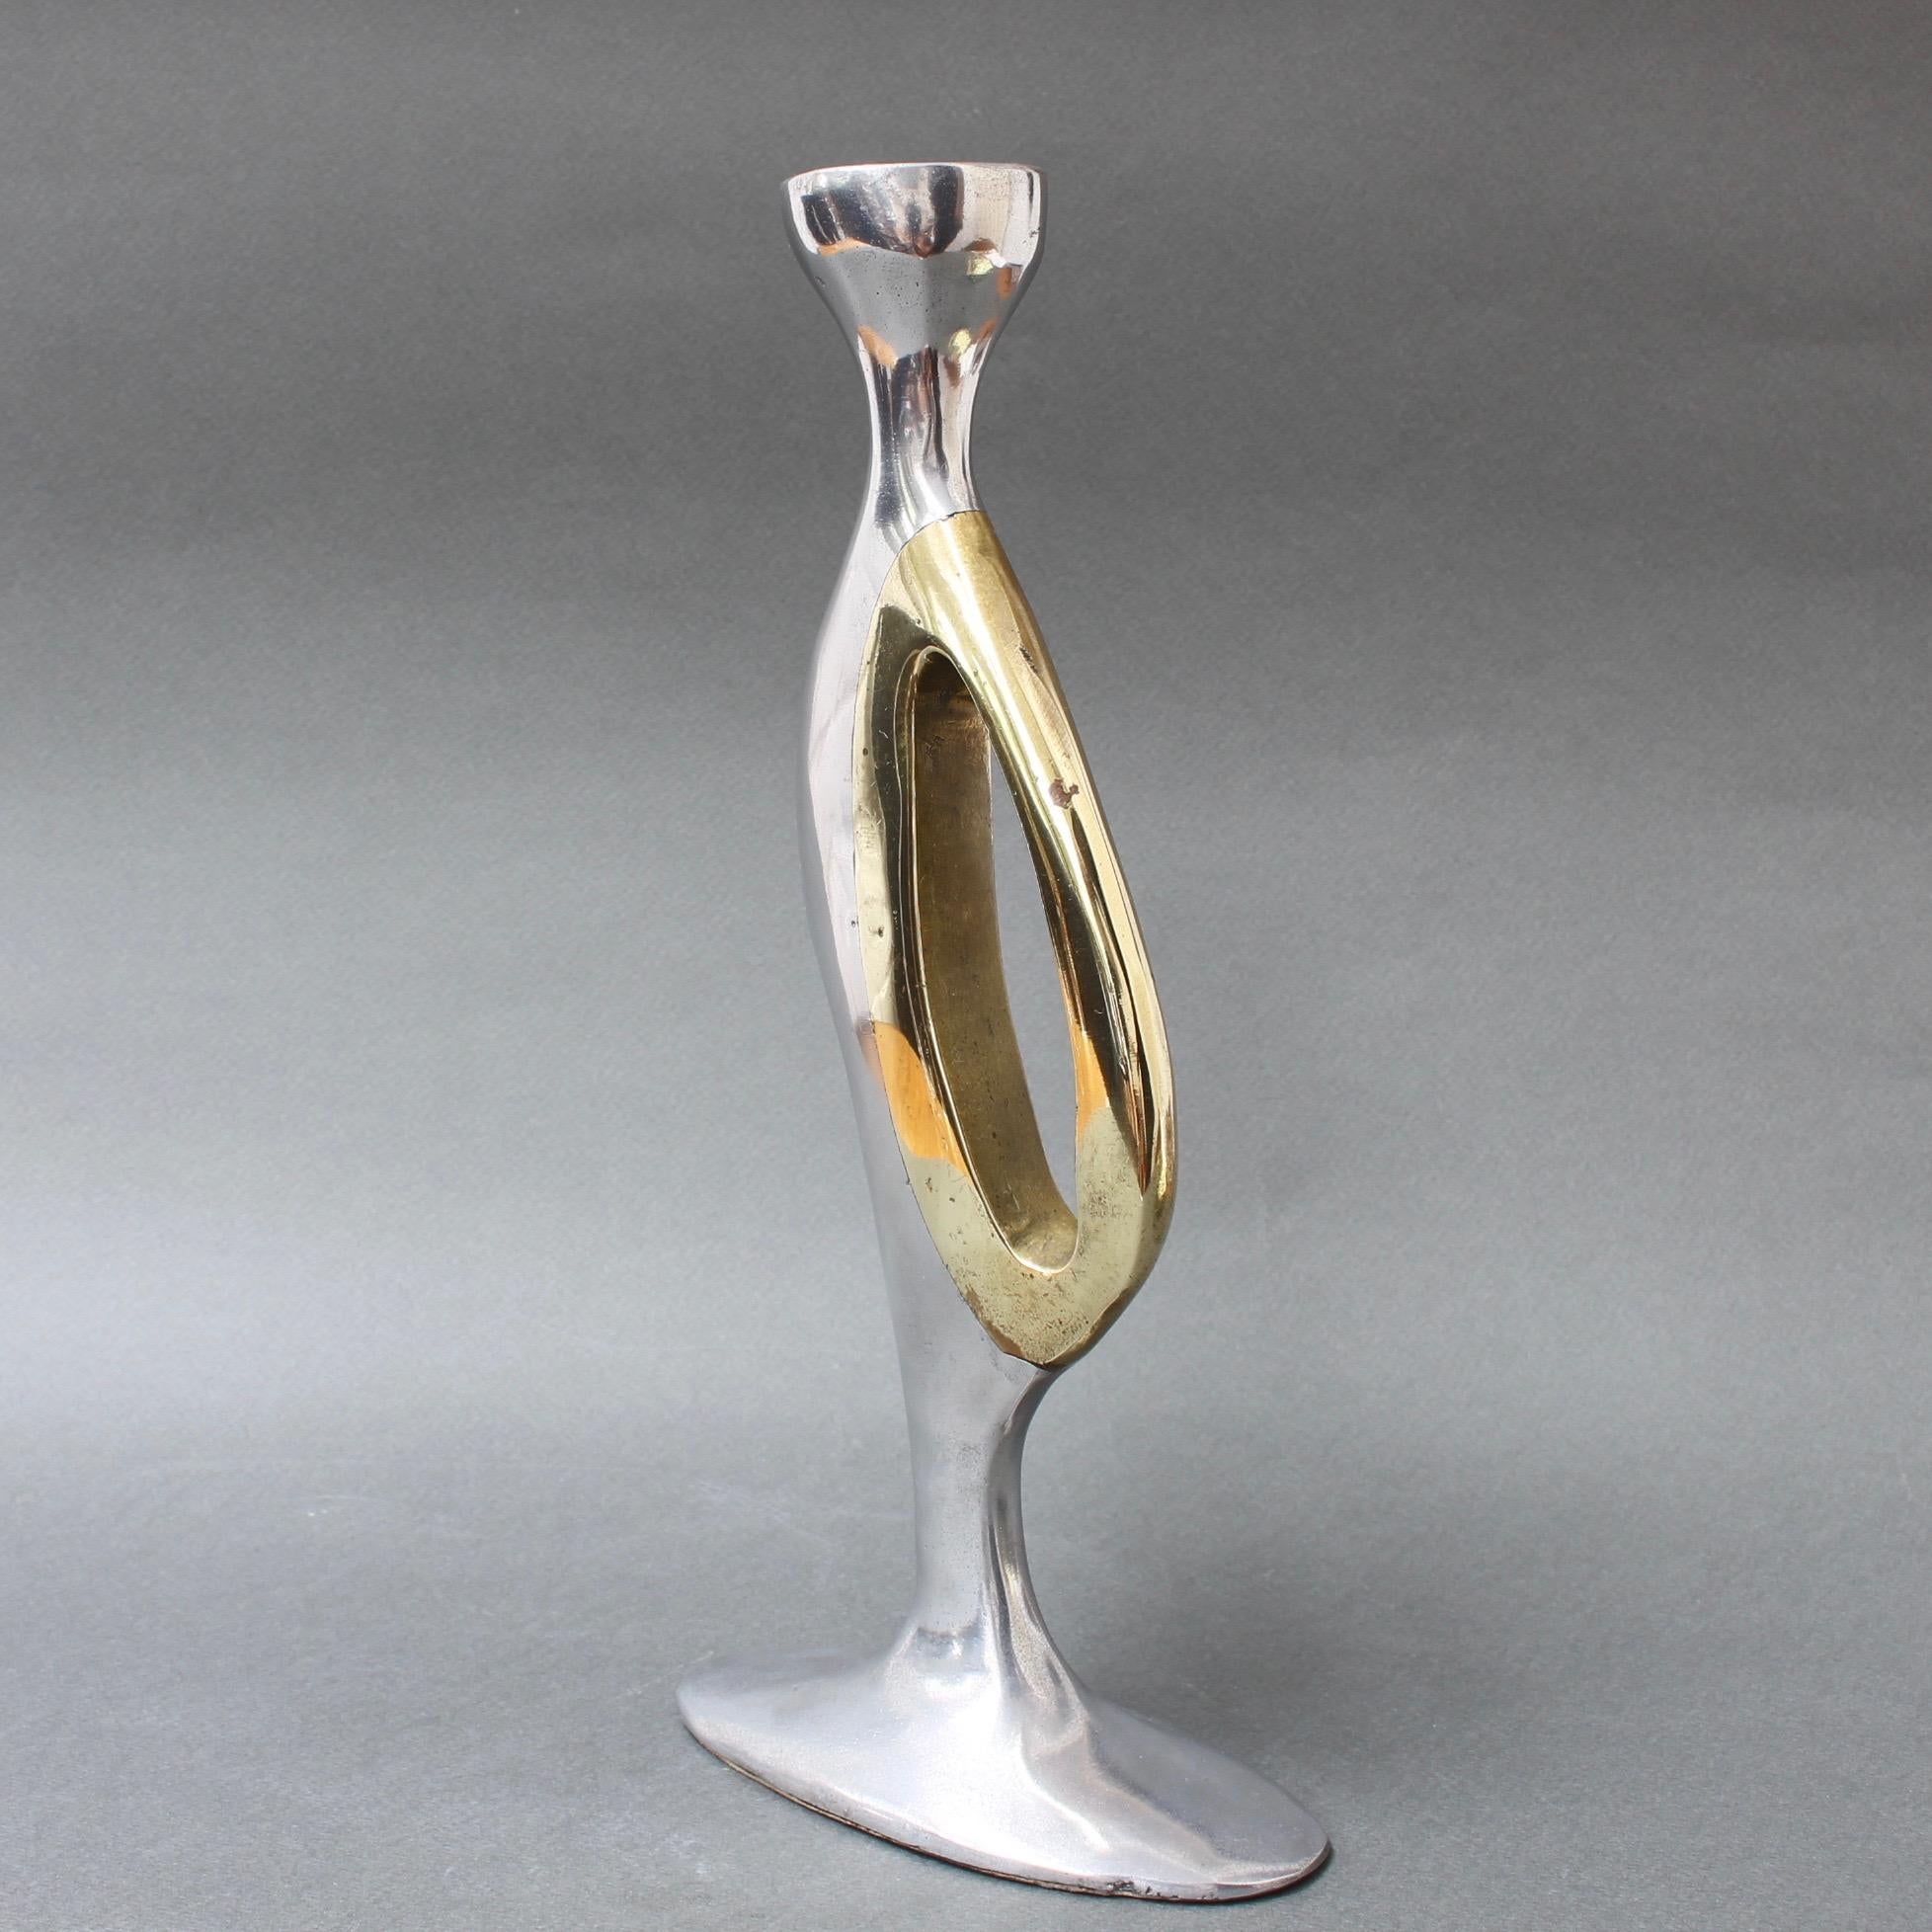 Spanish Aluminium and Brass Brutalist Style Candleholder by Leopold, s.c, 'circa 1970s'